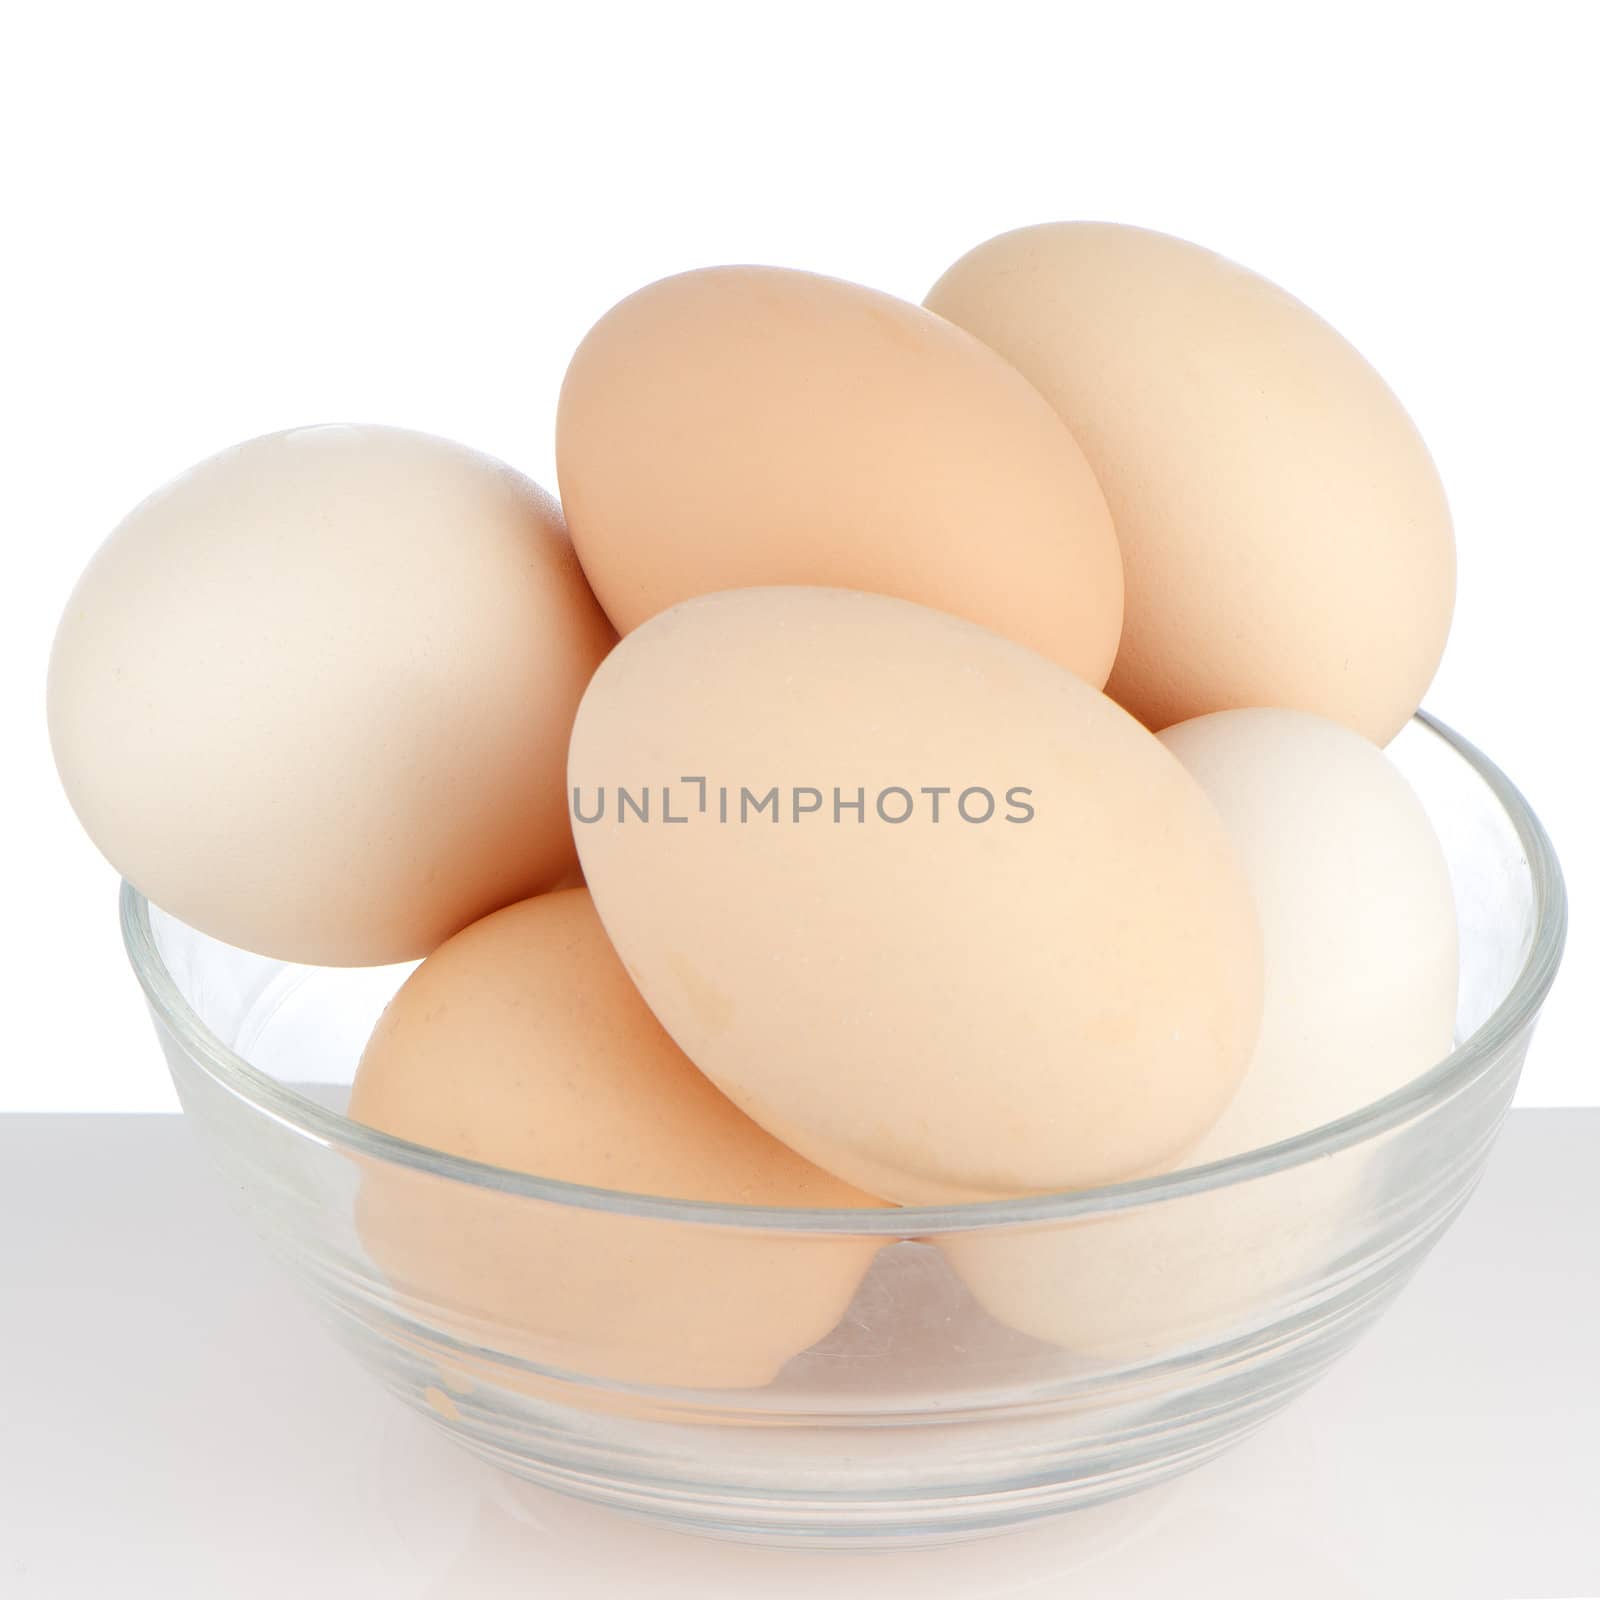 Brown eggs in transparent bowl on white background.